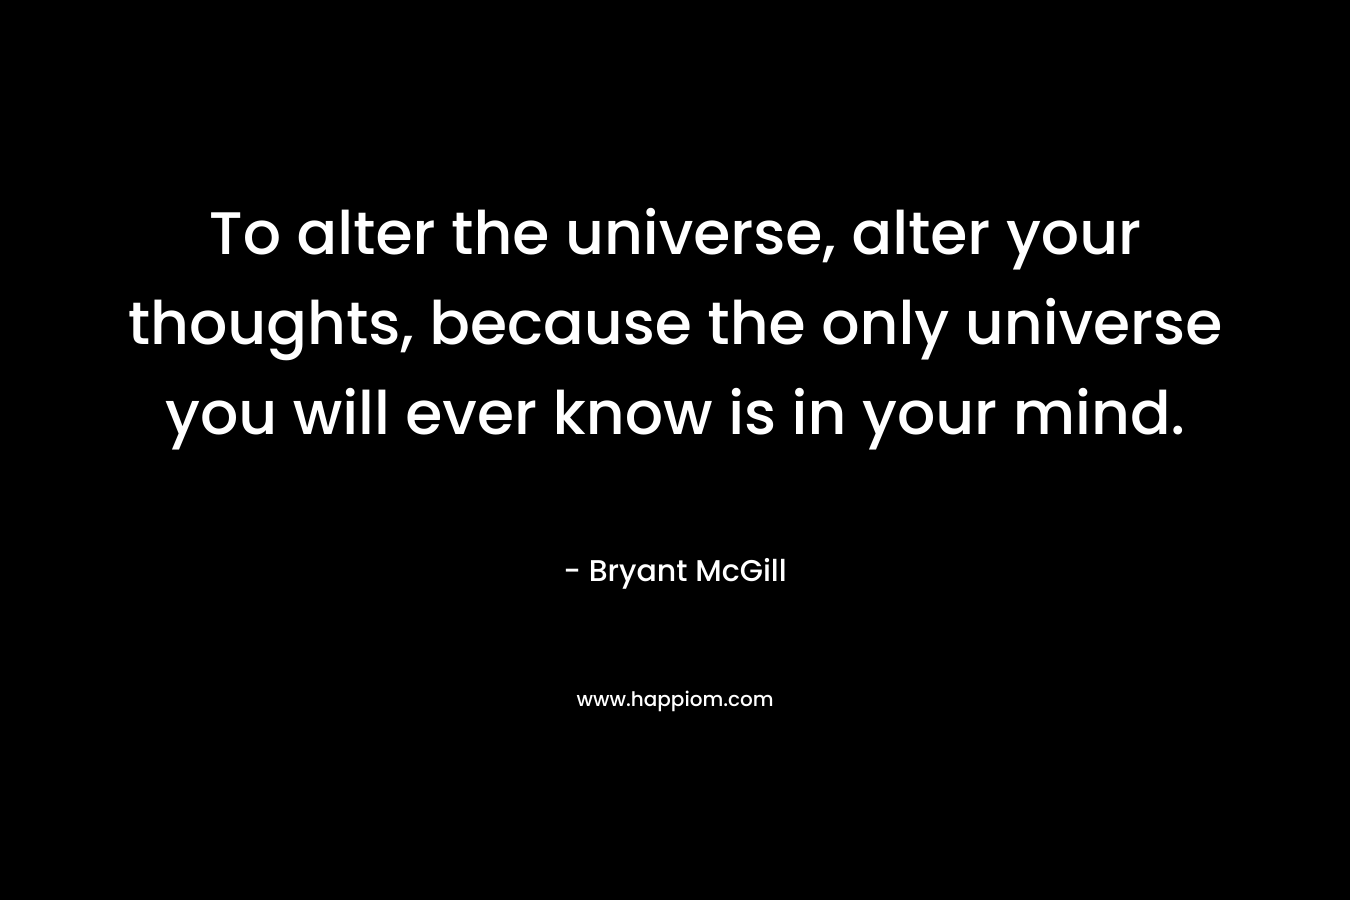 To alter the universe, alter your thoughts, because the only universe you will ever know is in your mind. – Bryant McGill